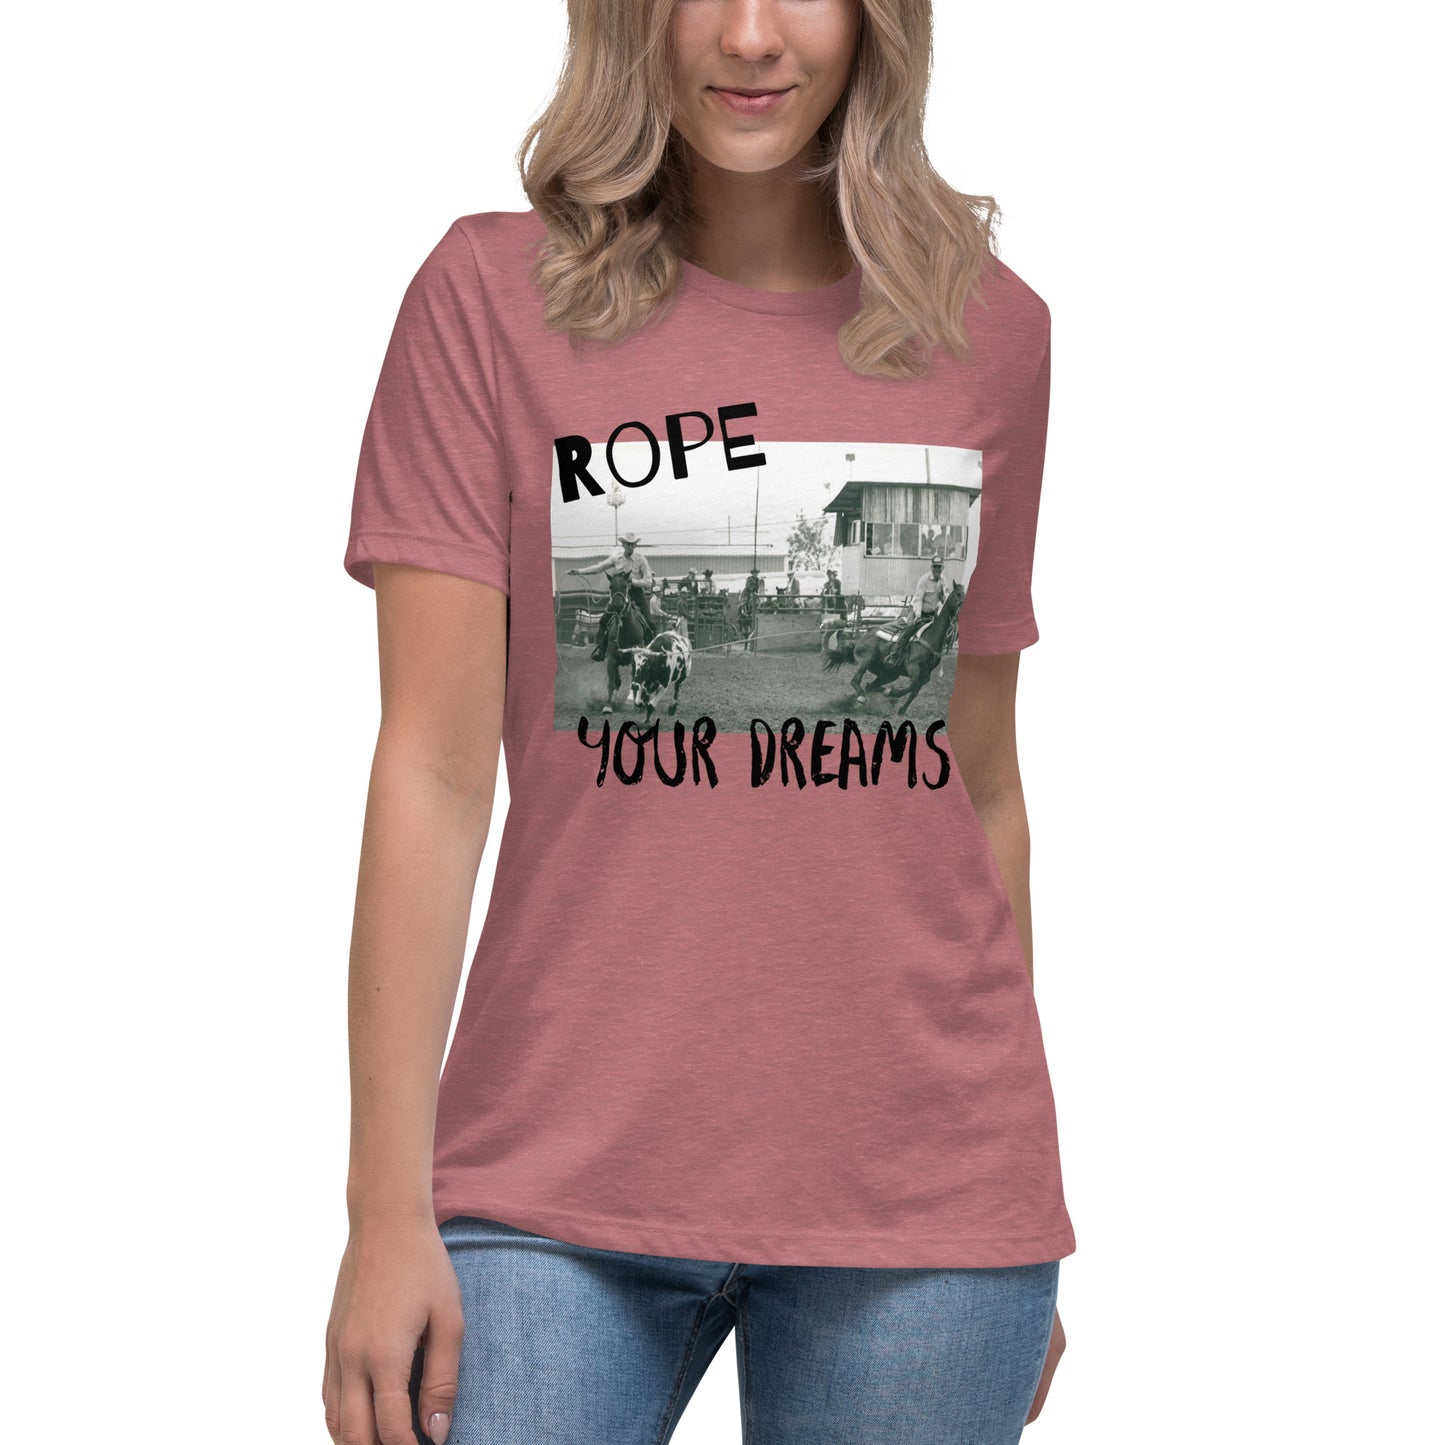 Rope Your Dreams (Women's Fit Tee)